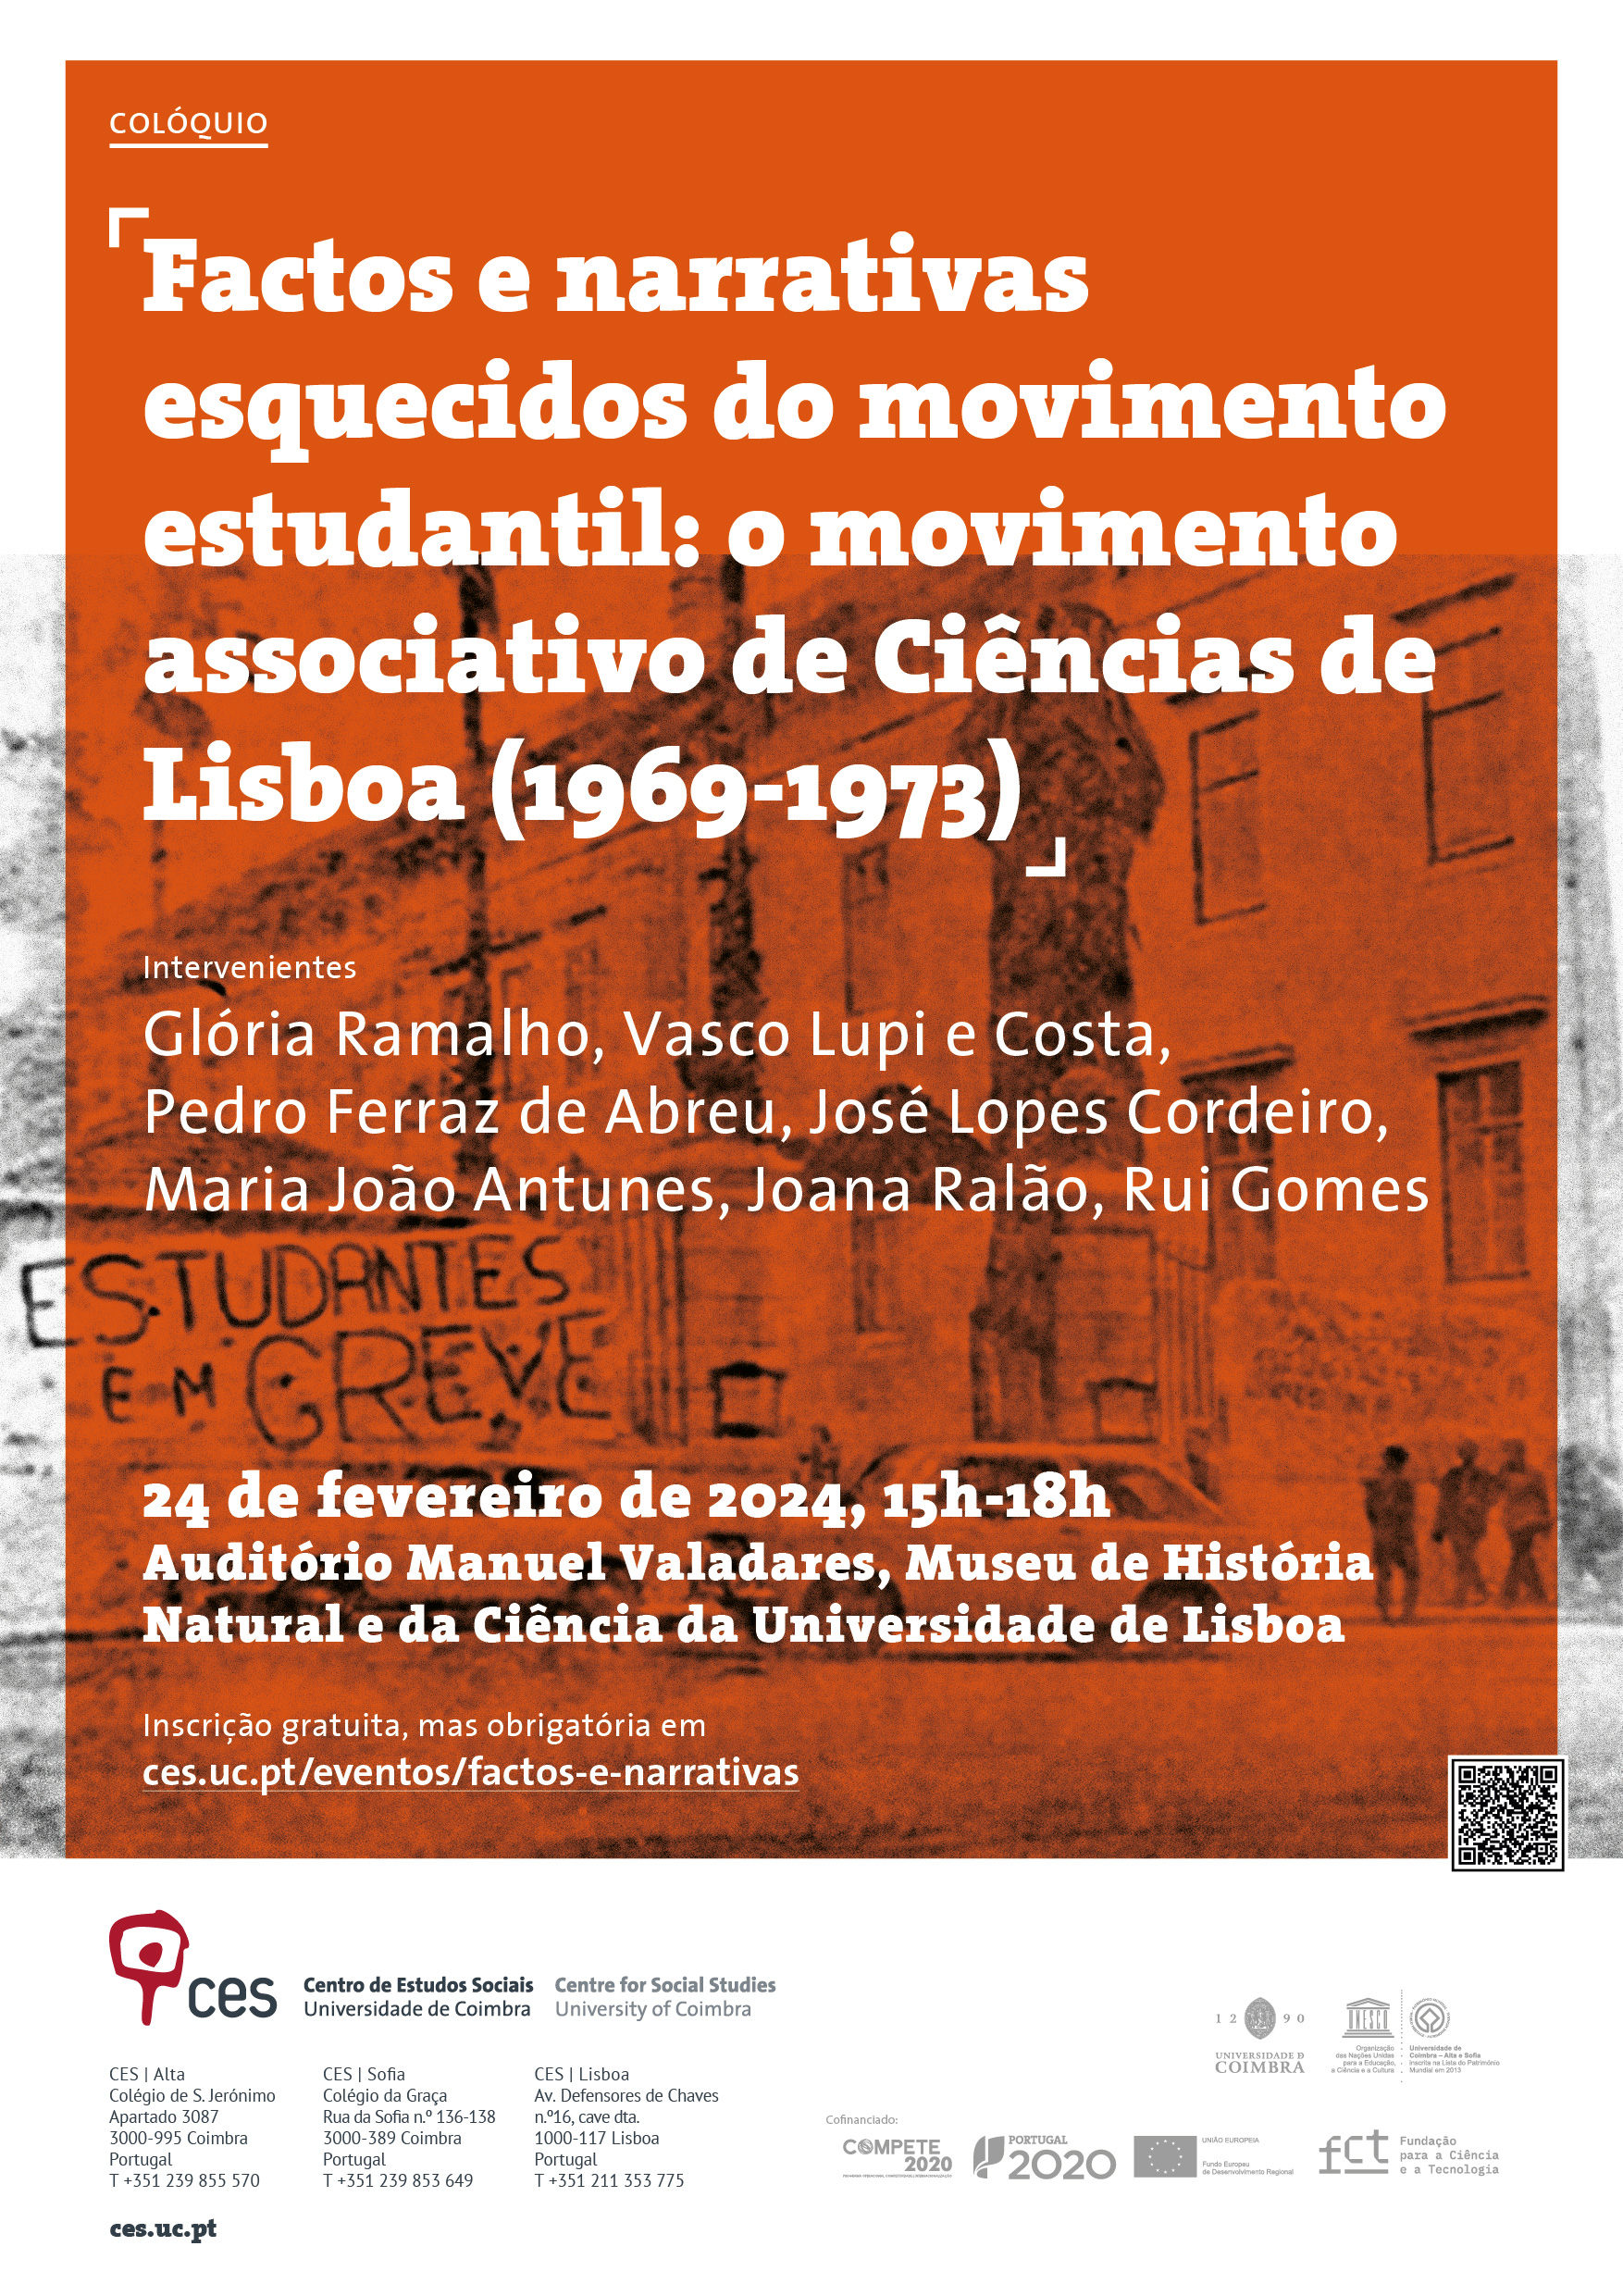 Forgotten facts and narratives of the student movement: the Lisbon Science Association (1969-1973)<span id="edit_44453"><script>$(function() { $('#edit_44453').load( "/myces/user/editobj.php?tipo=evento&id=44453" ); });</script></span>